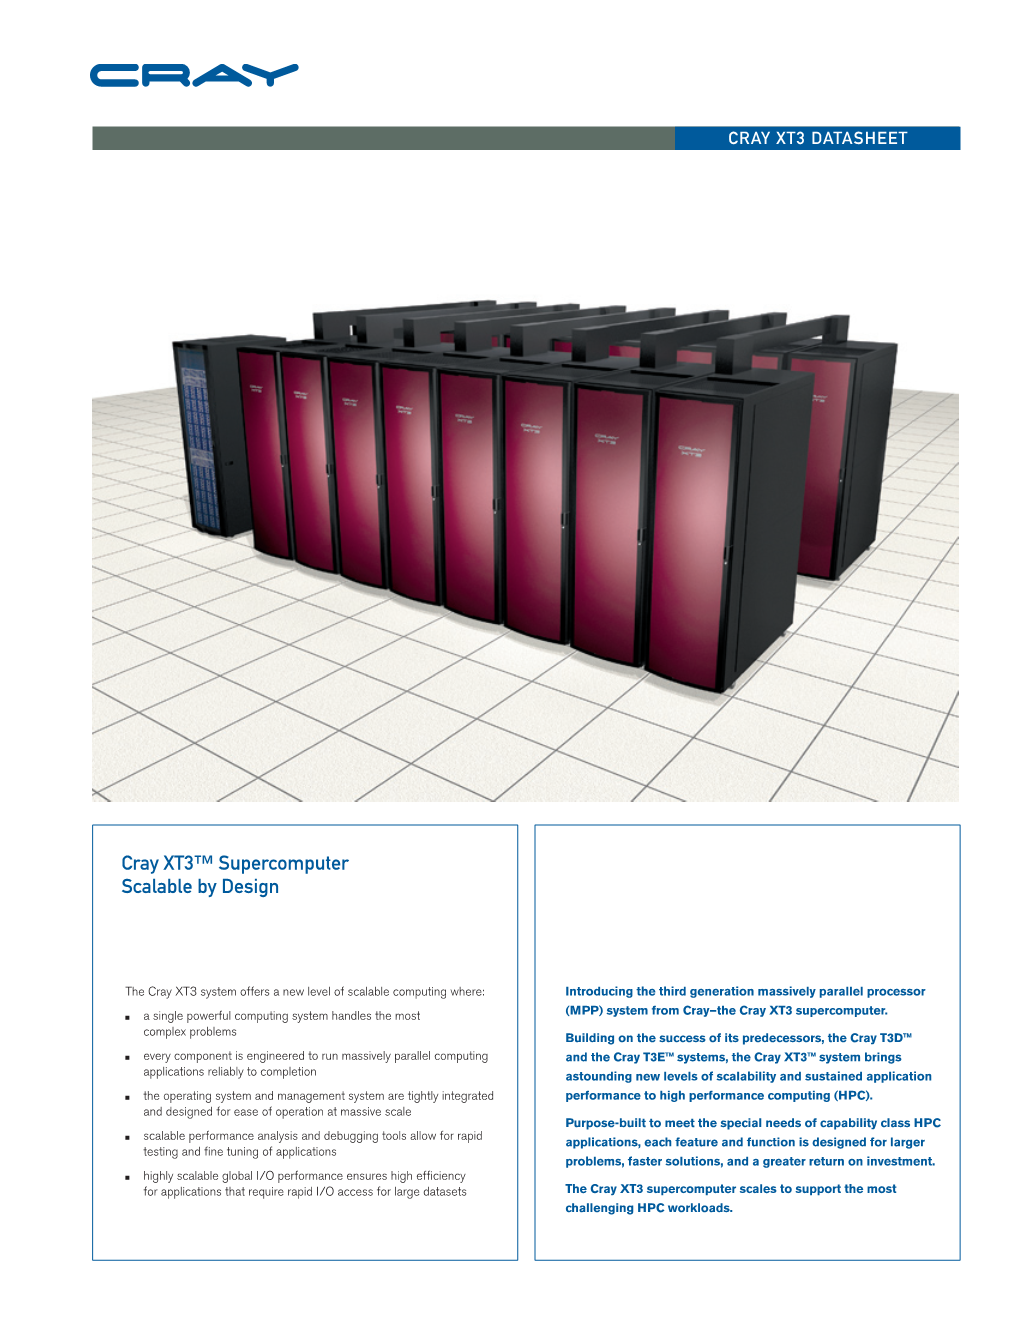 Cray XT3™ Supercomputer Scalable by Design